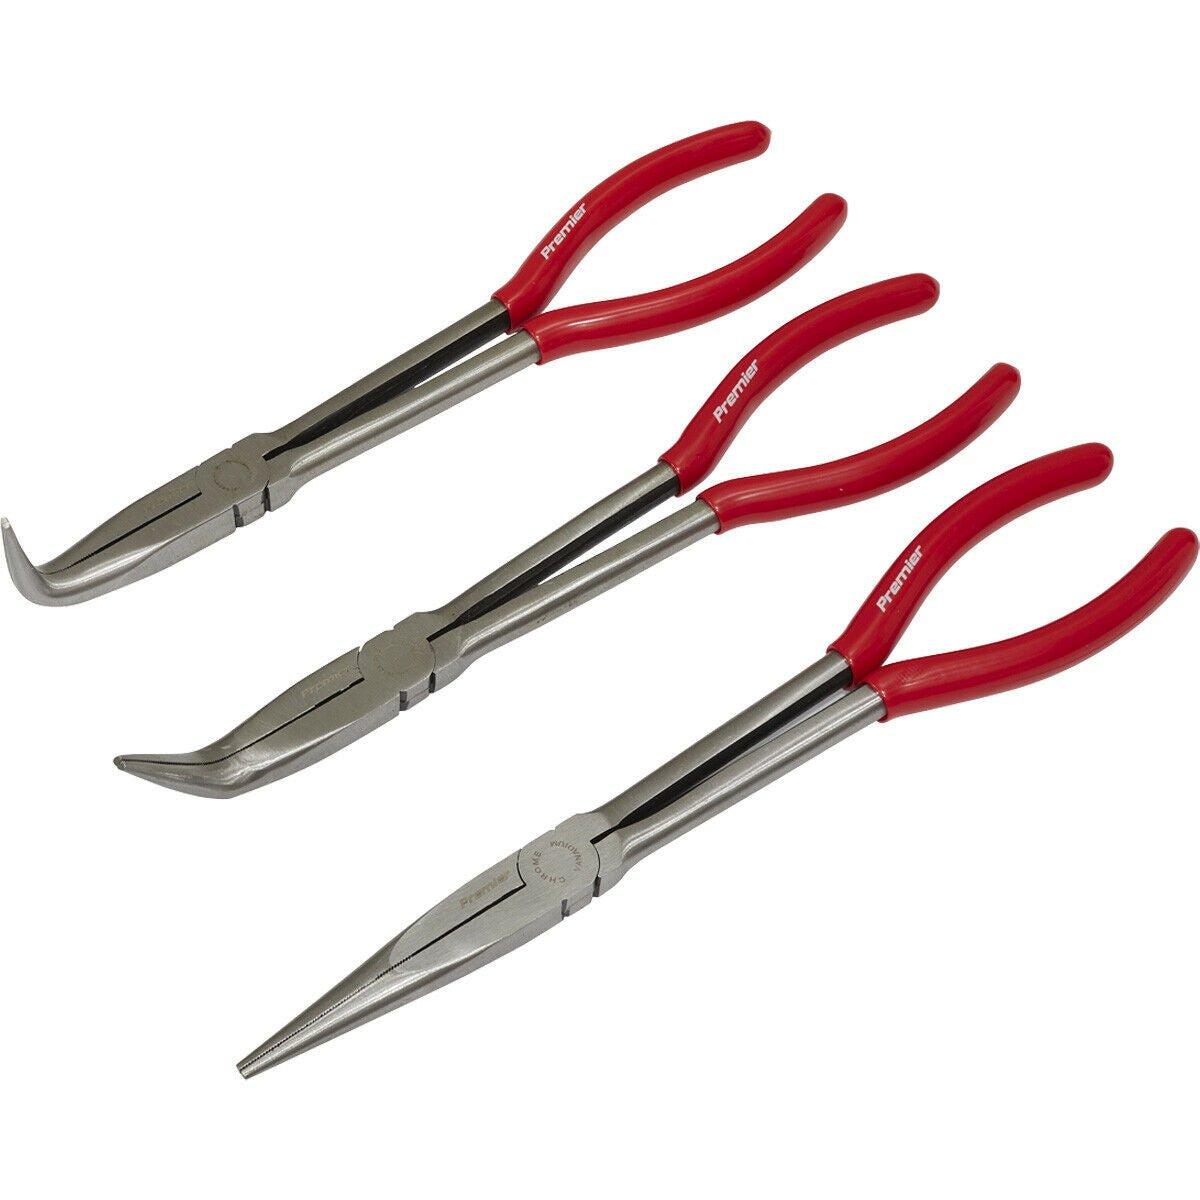 3 Piece 280mm Needle Nose Pliers Set - Straight & Angled Nose - Serrated Jaws